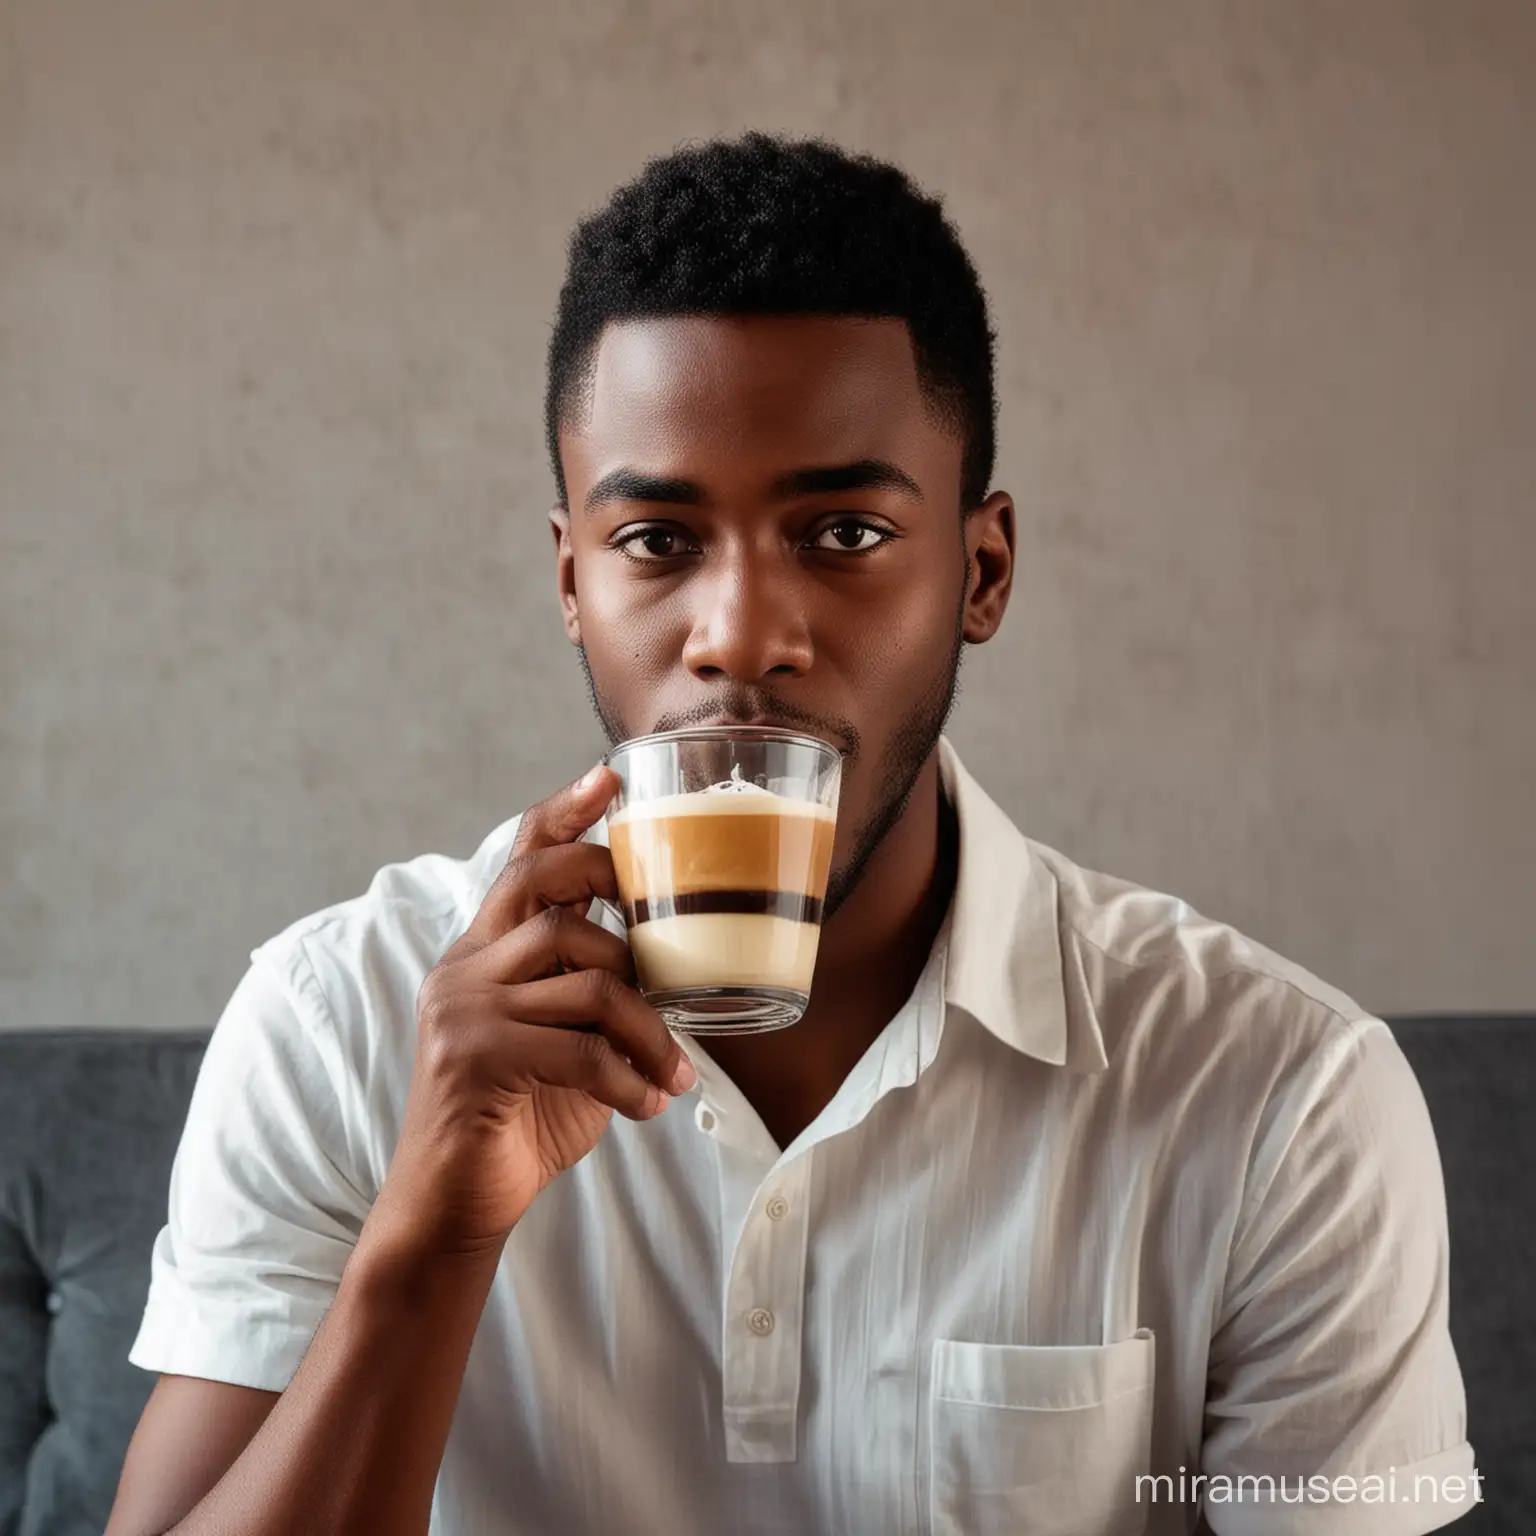 Young African Man Enjoying a Refreshing Cold Coffee